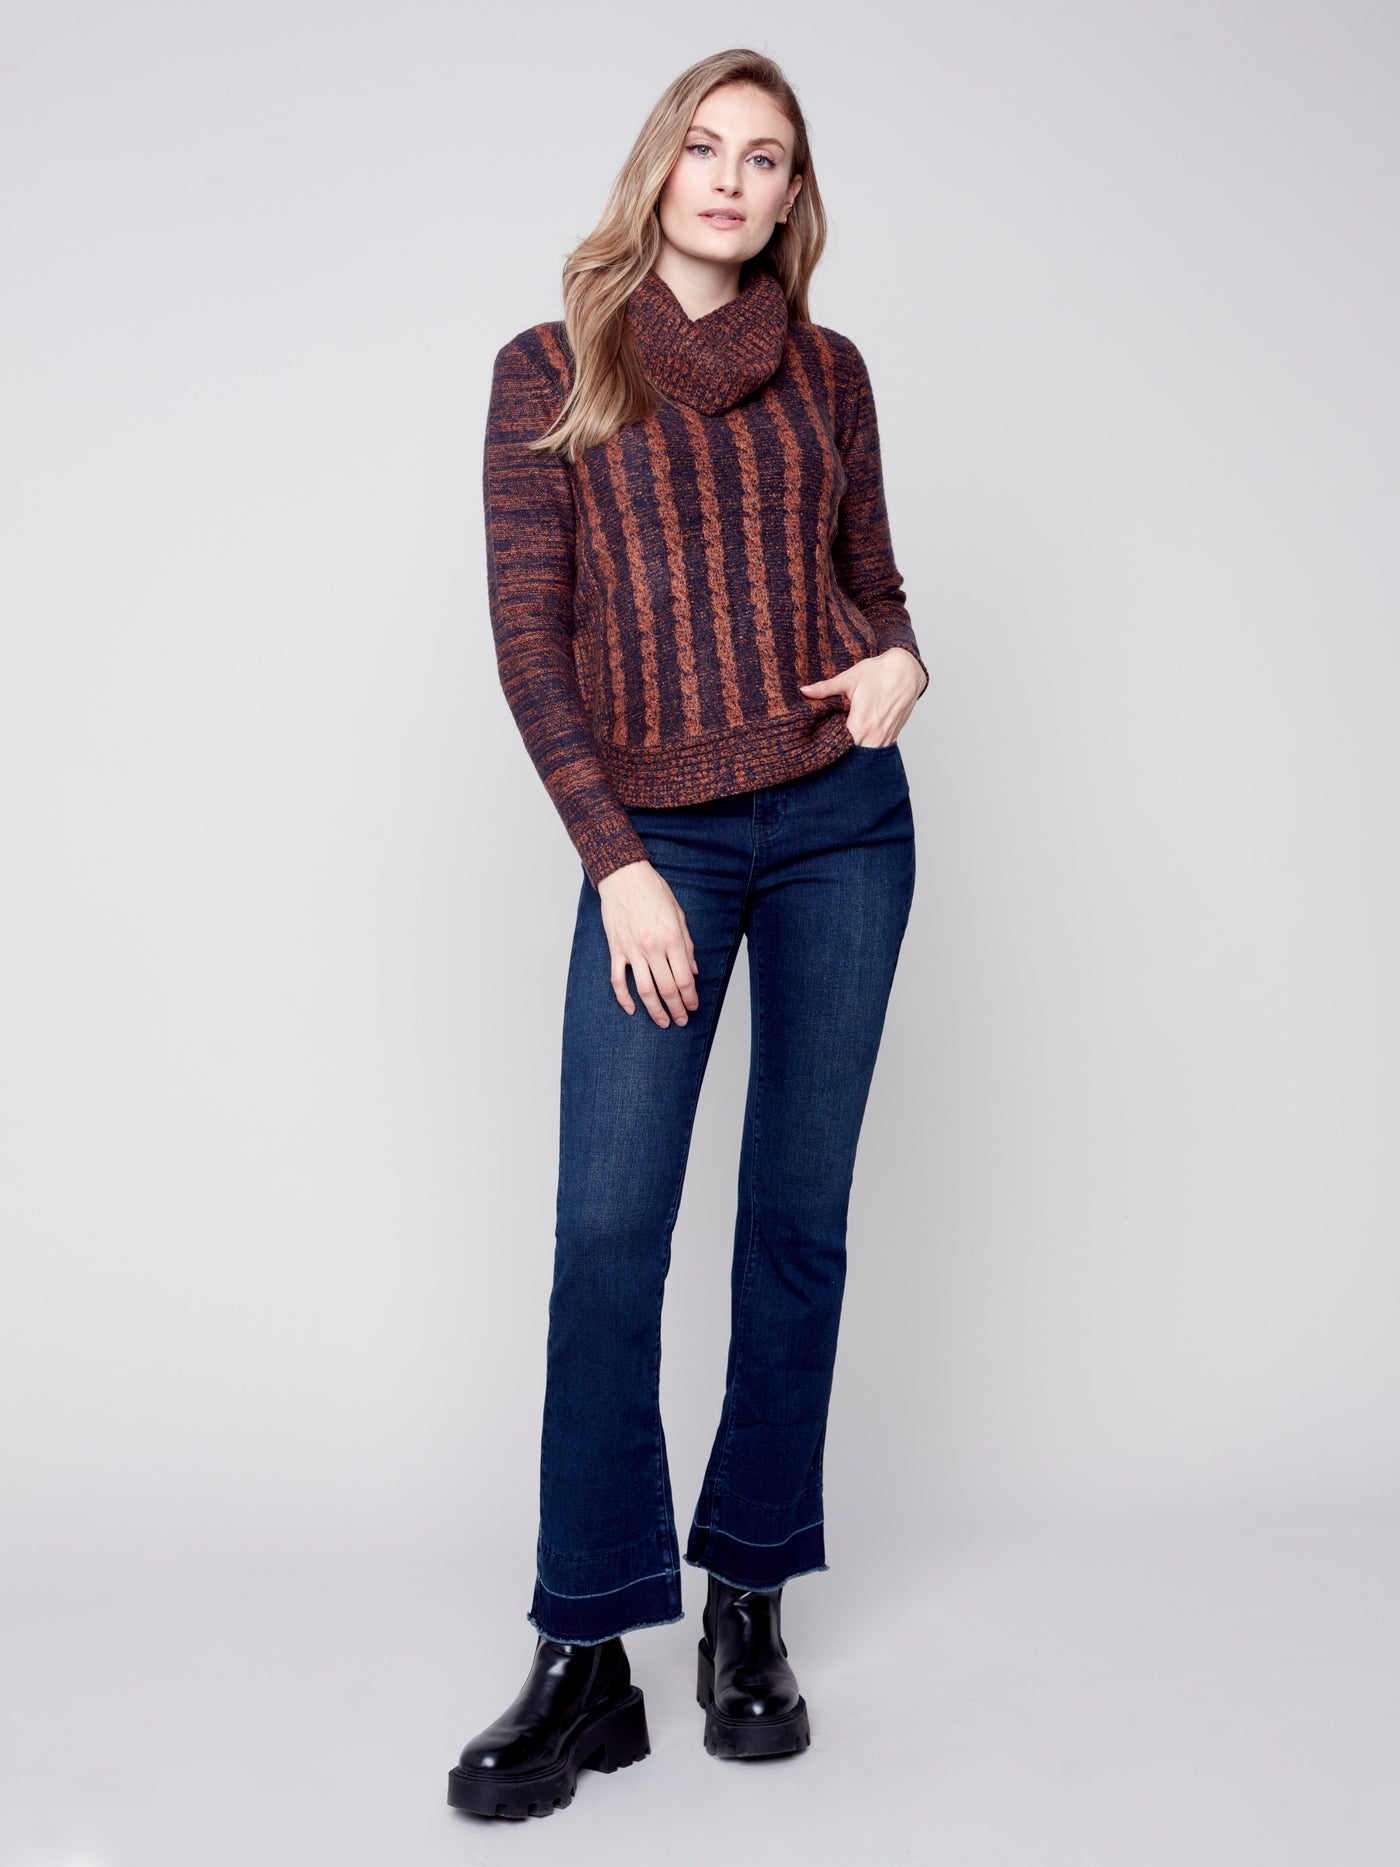 Charlie B Two-Tone Cable Knit Turtleneck Round Hem Sweater 